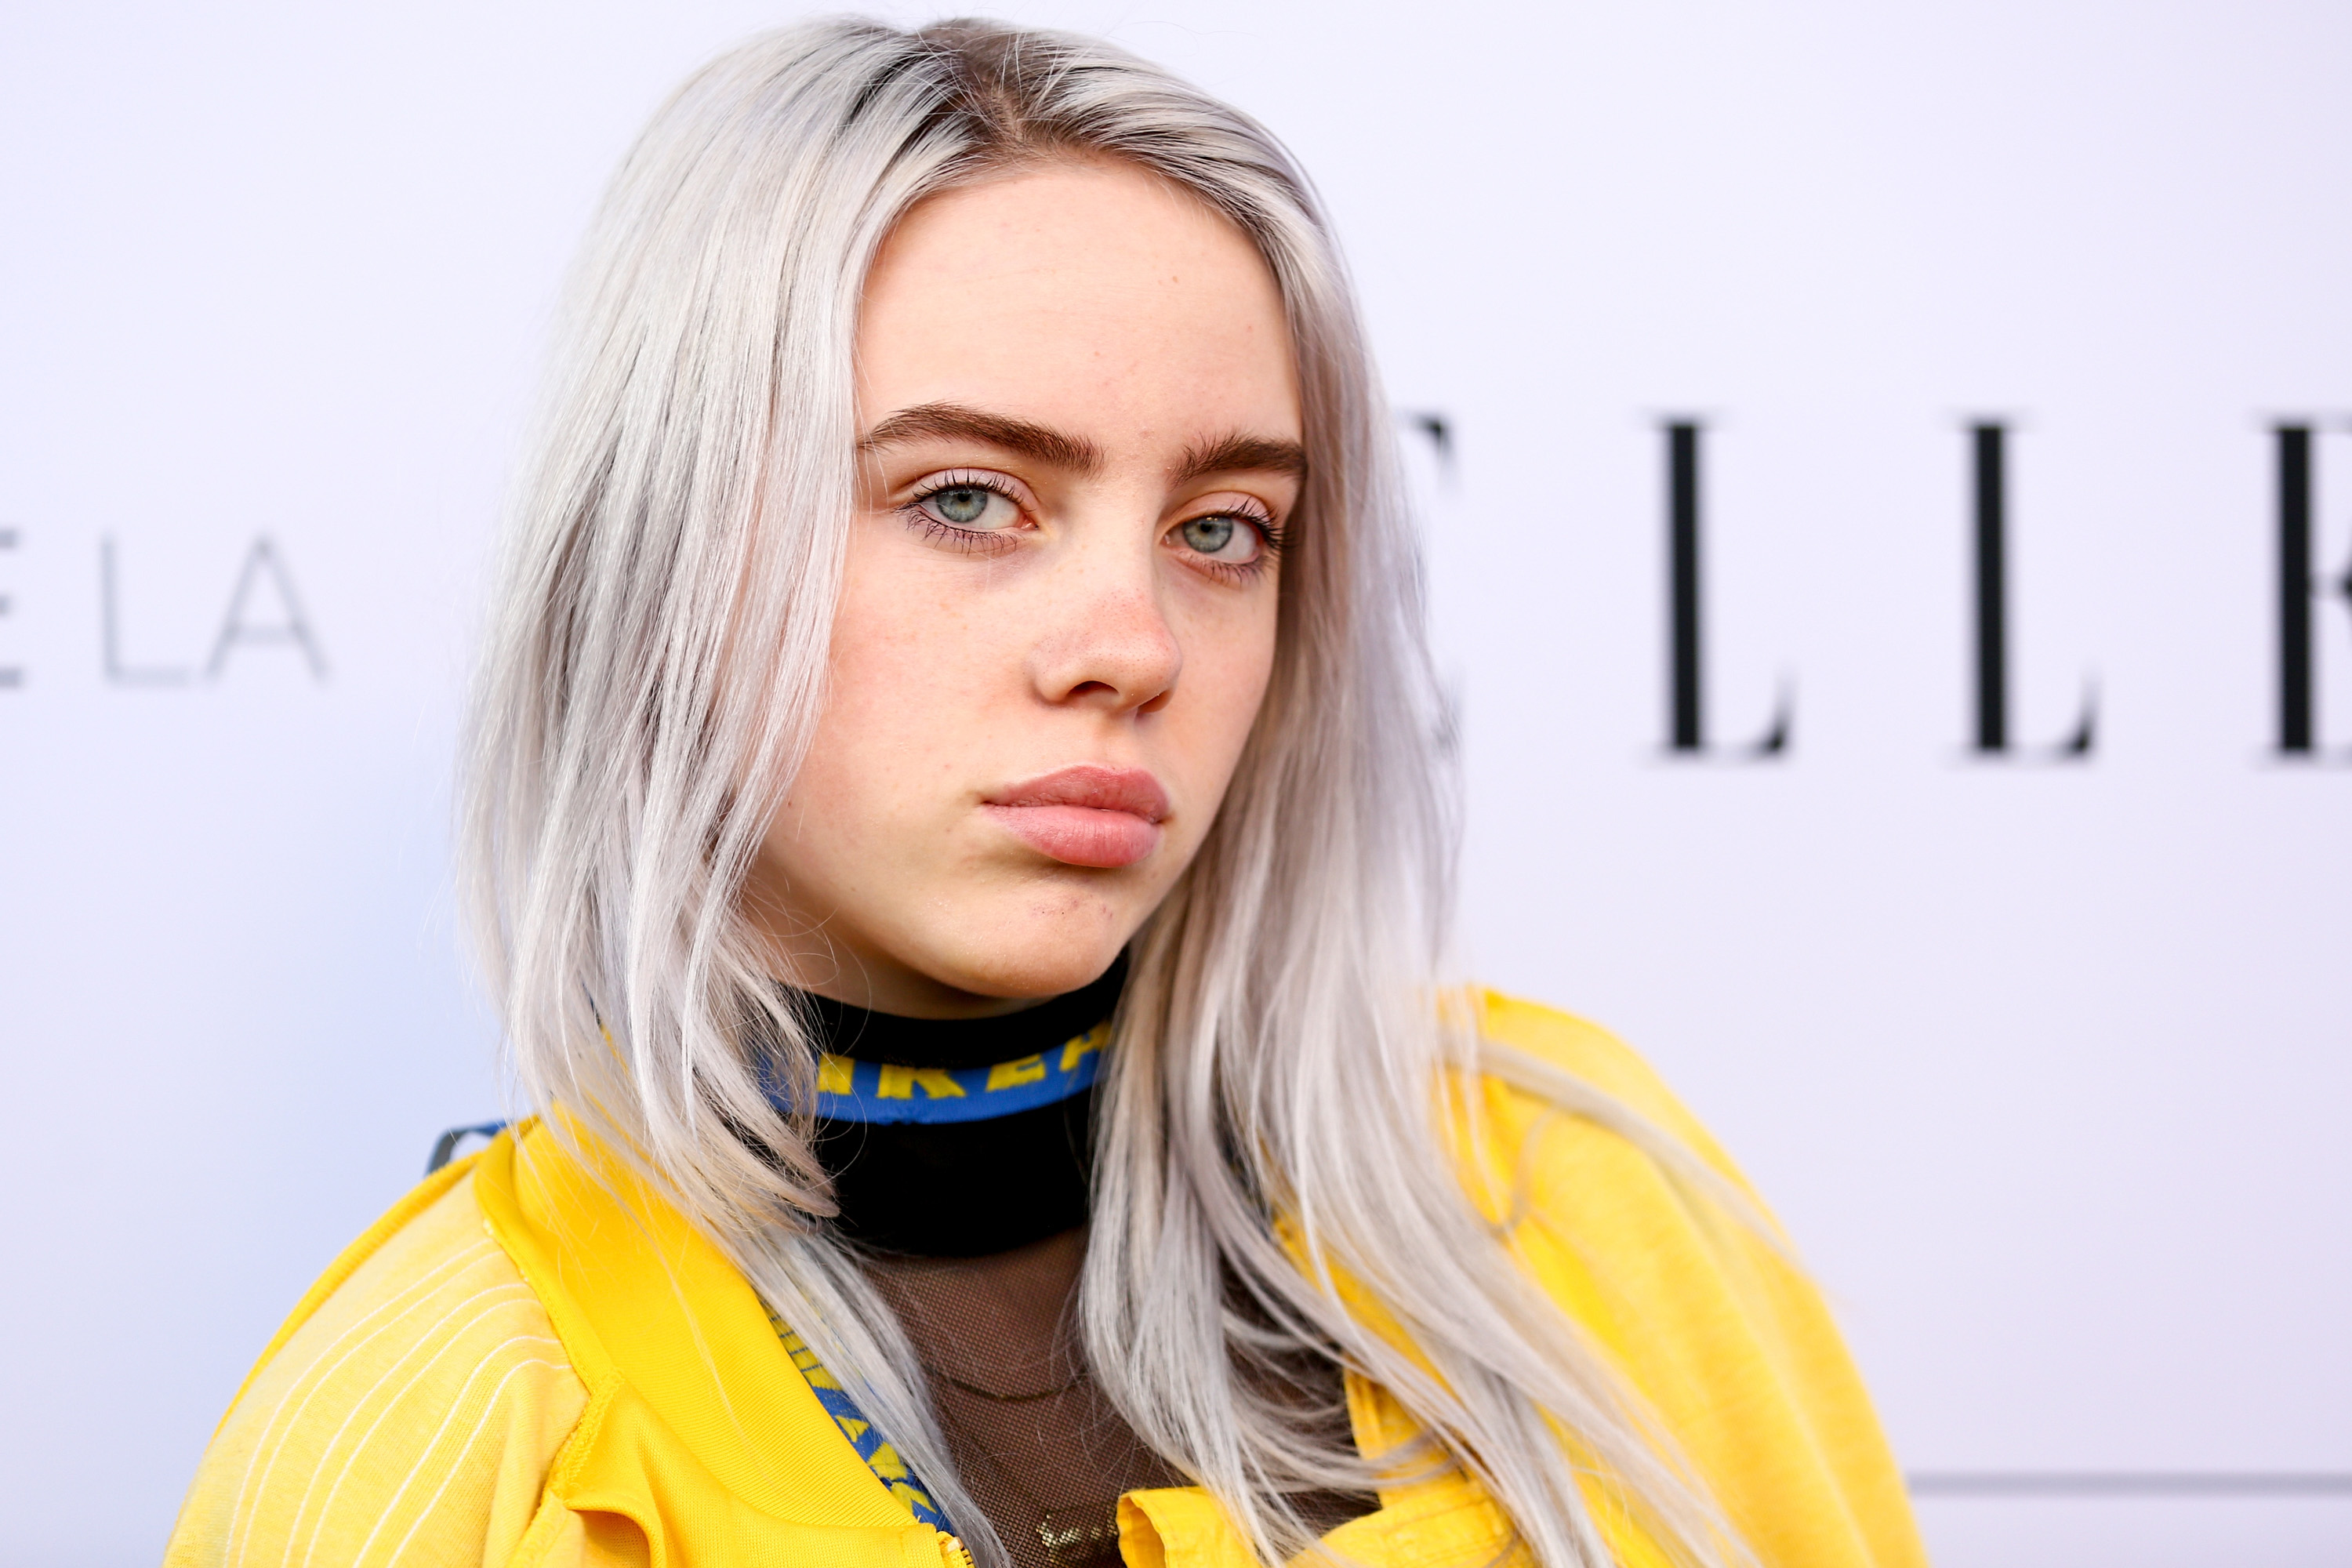 This is a photo of Billie Eilish.